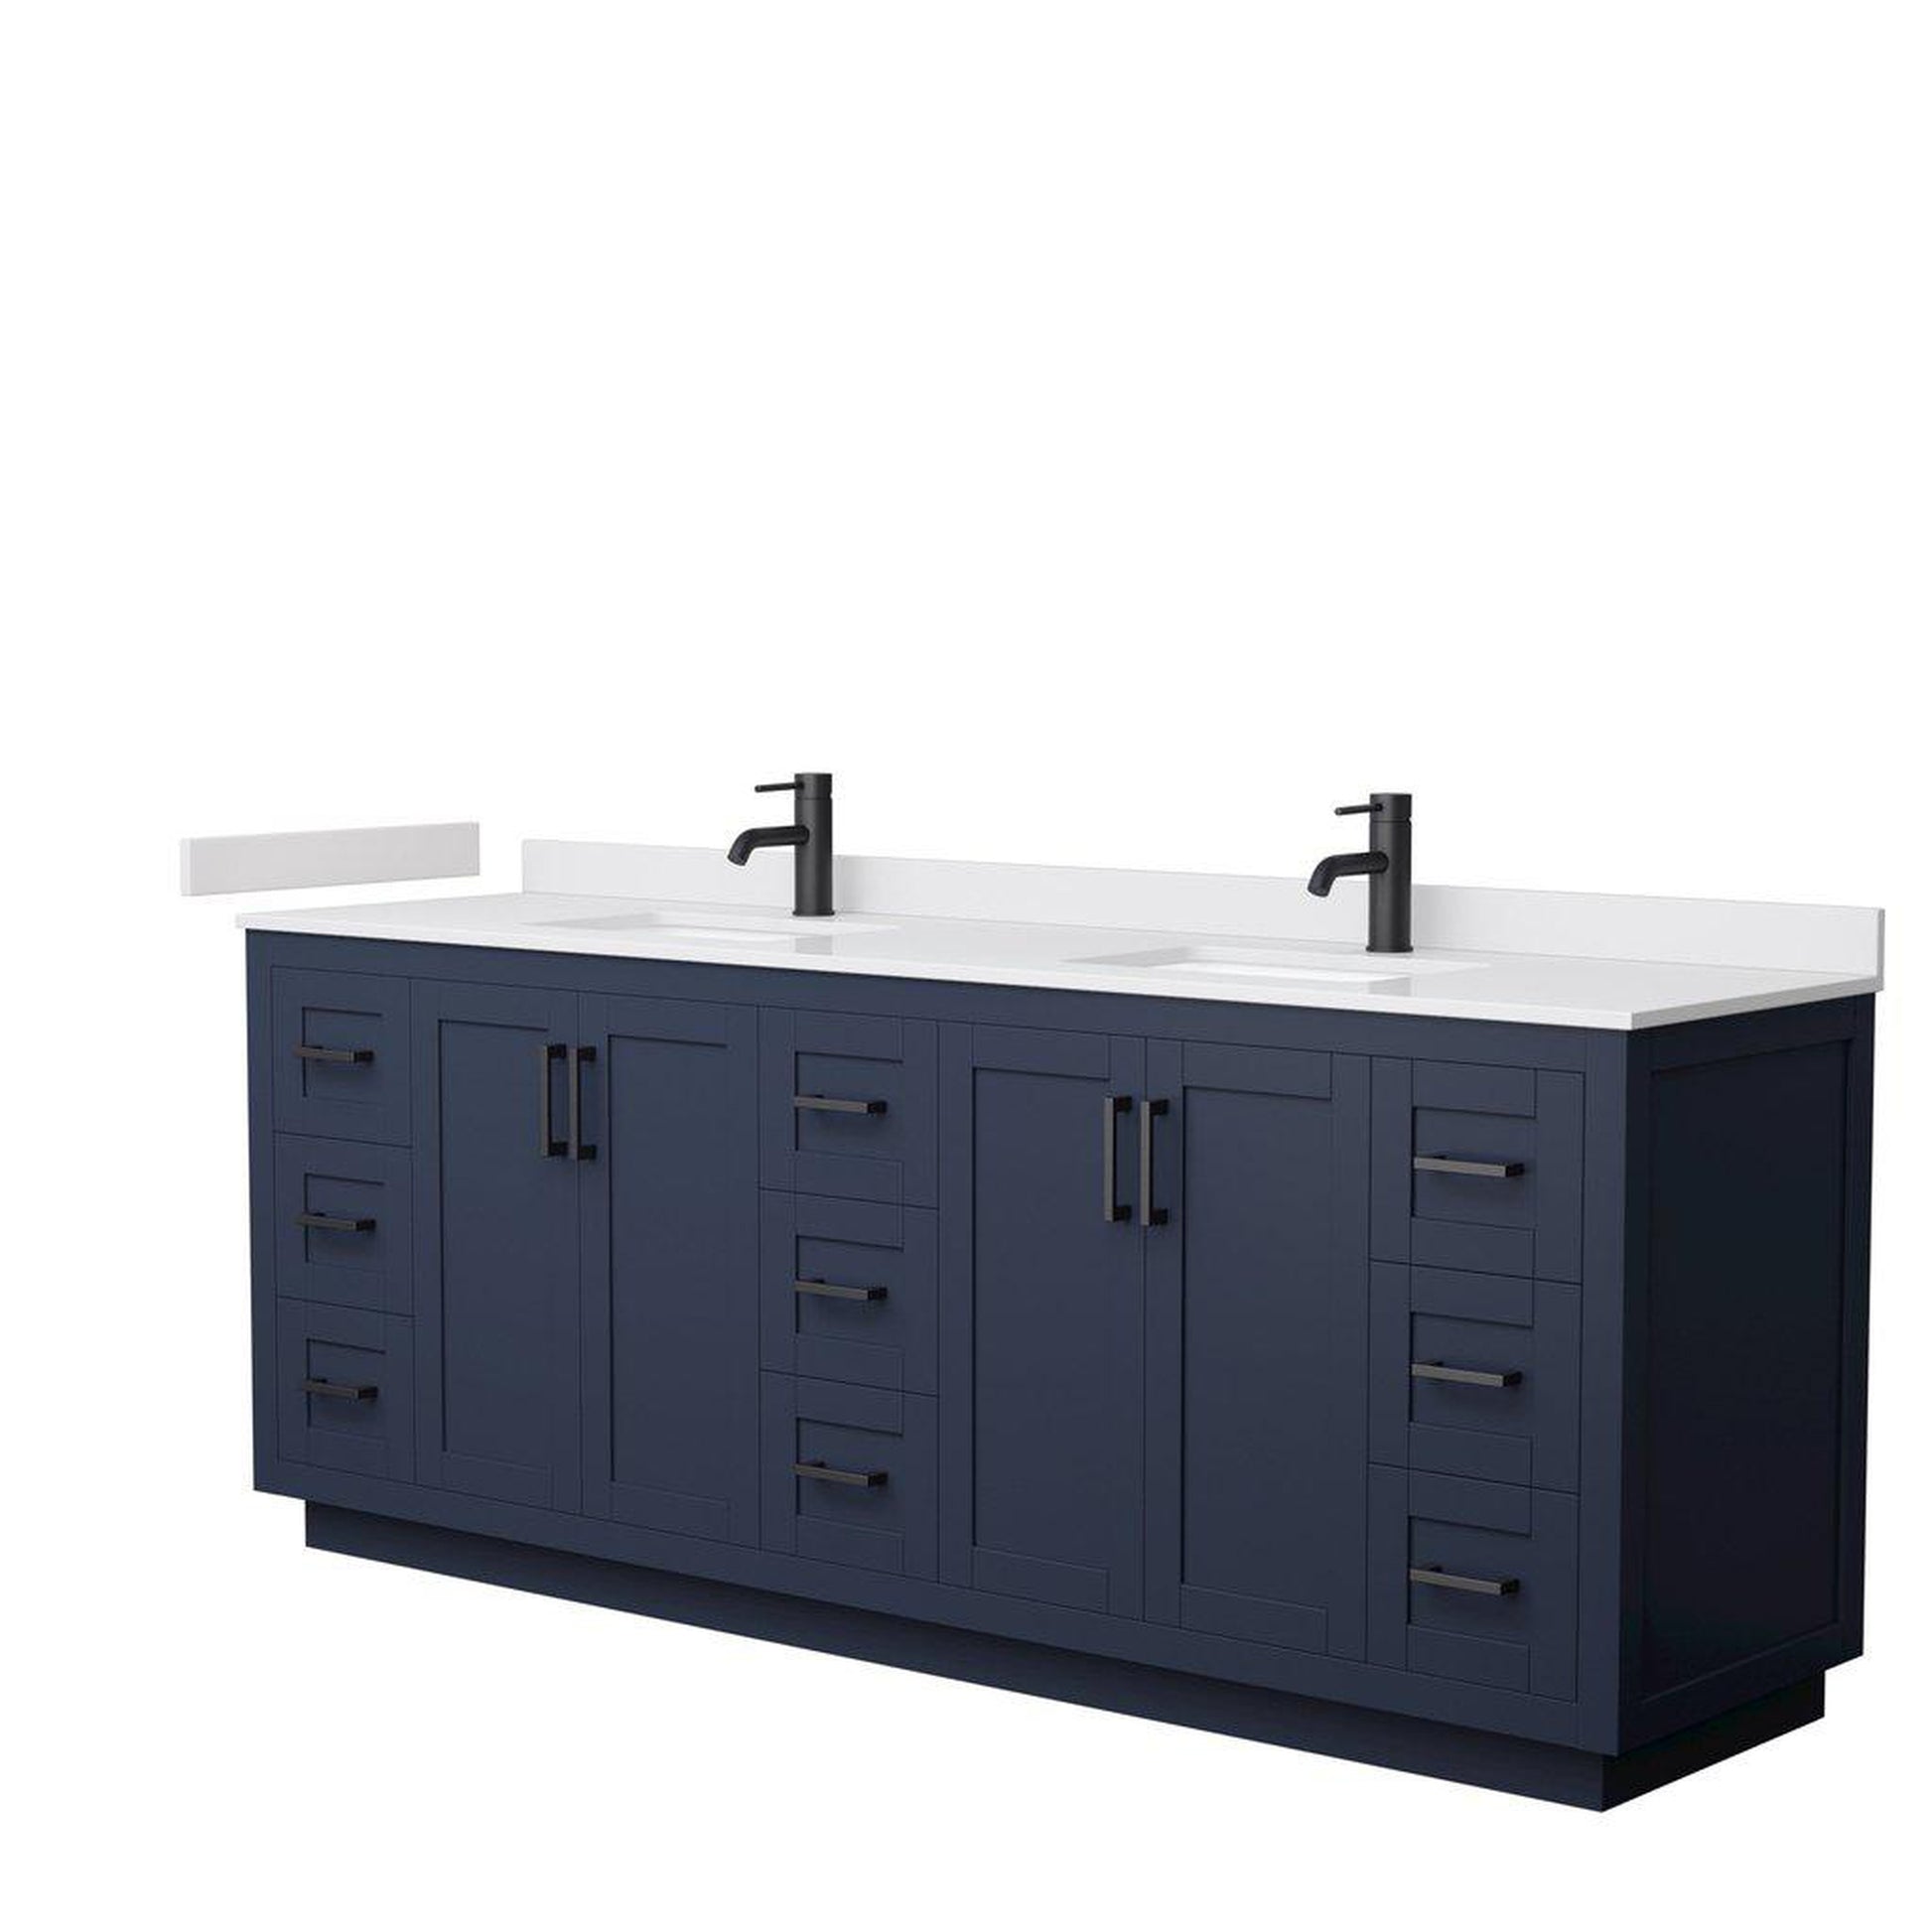 Wyndham Collection Miranda 84" Double Bathroom Dark Blue Vanity Set With White Cultured Marble Countertop, Undermount Square Sink, And Matte Black Trim